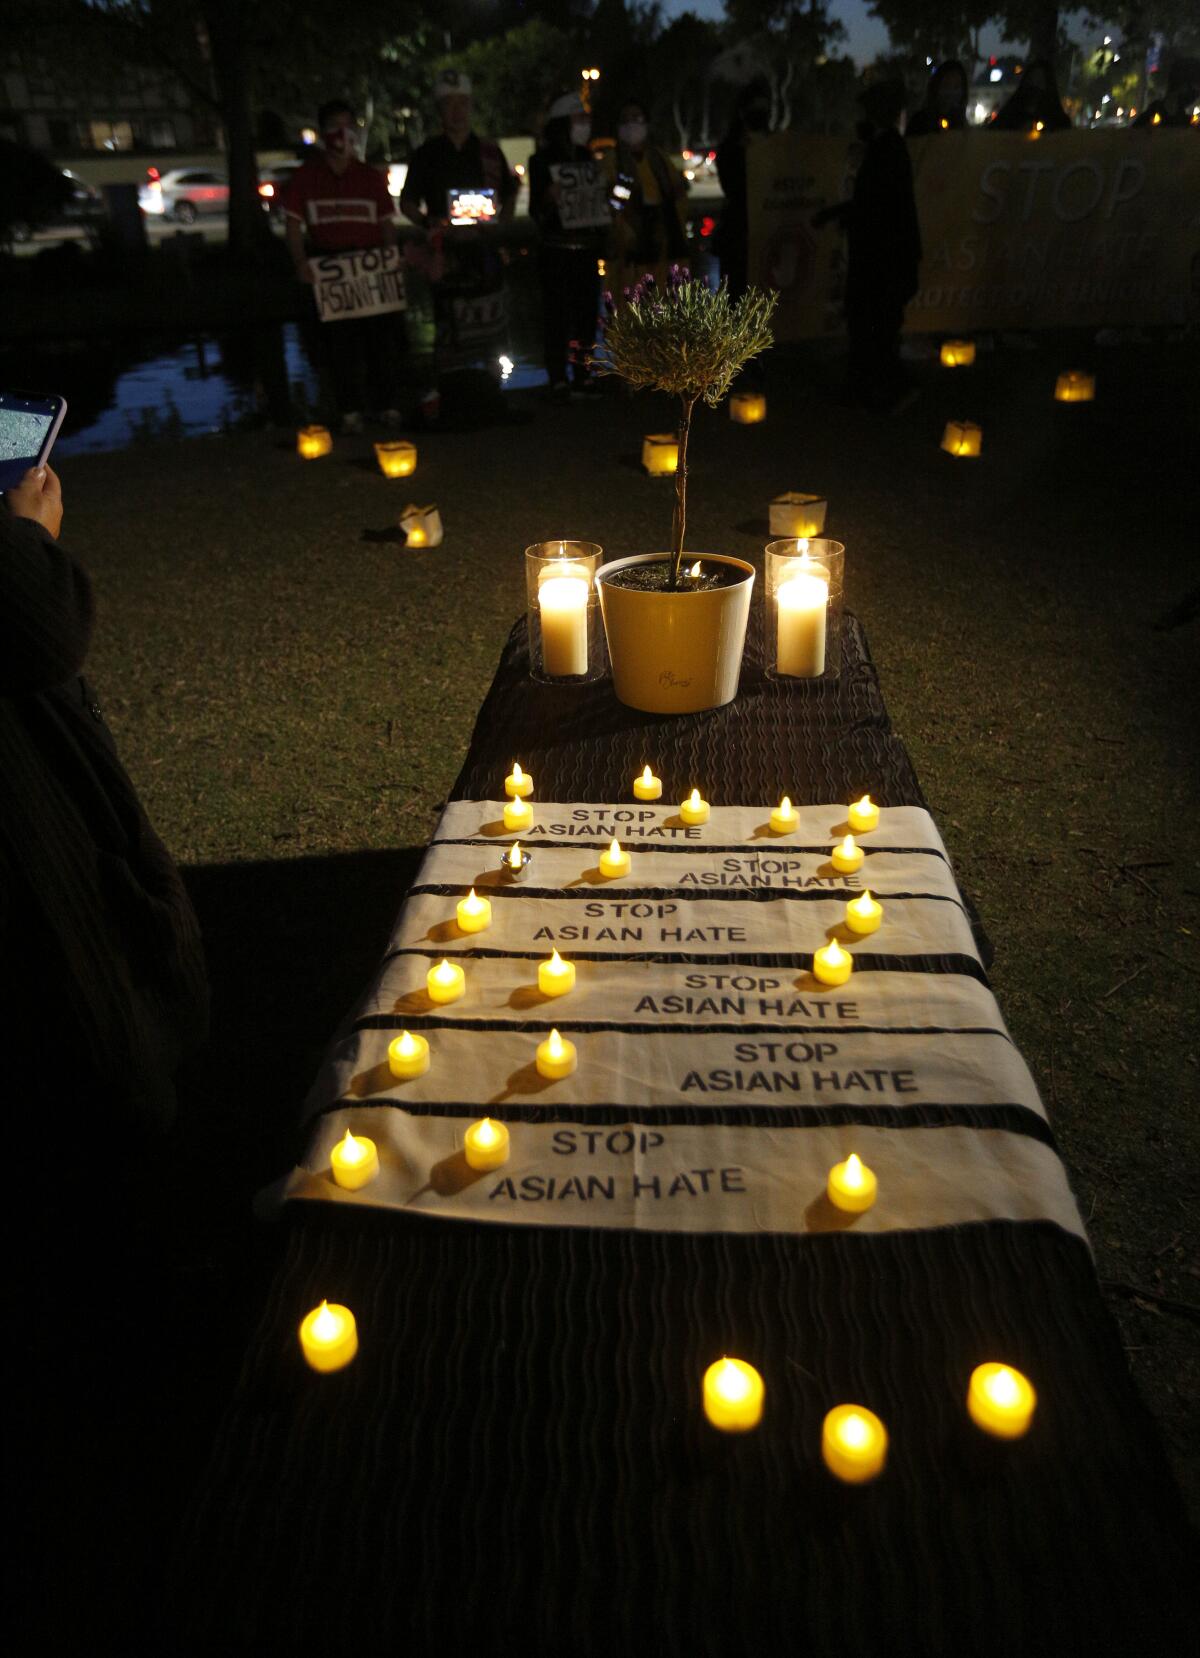 A candlelight vigil at Community Center Park in Garden Grove on March 23, 2021.